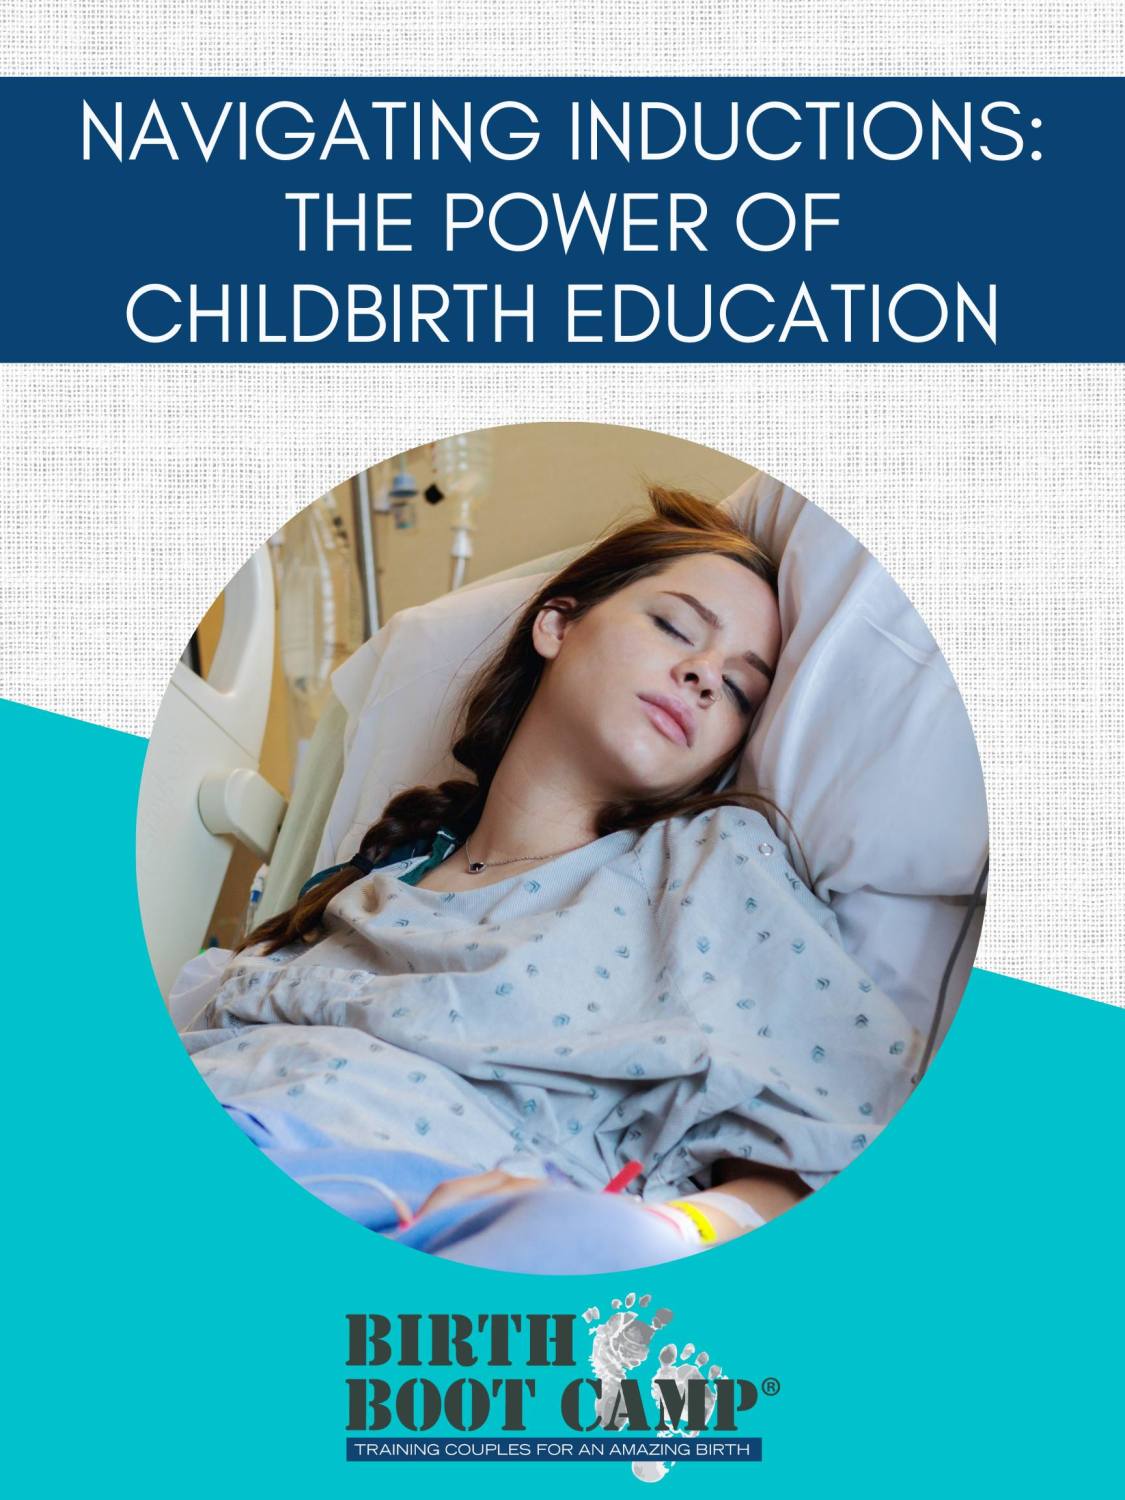 Navigating Inductions: The Power of Childbirth Education